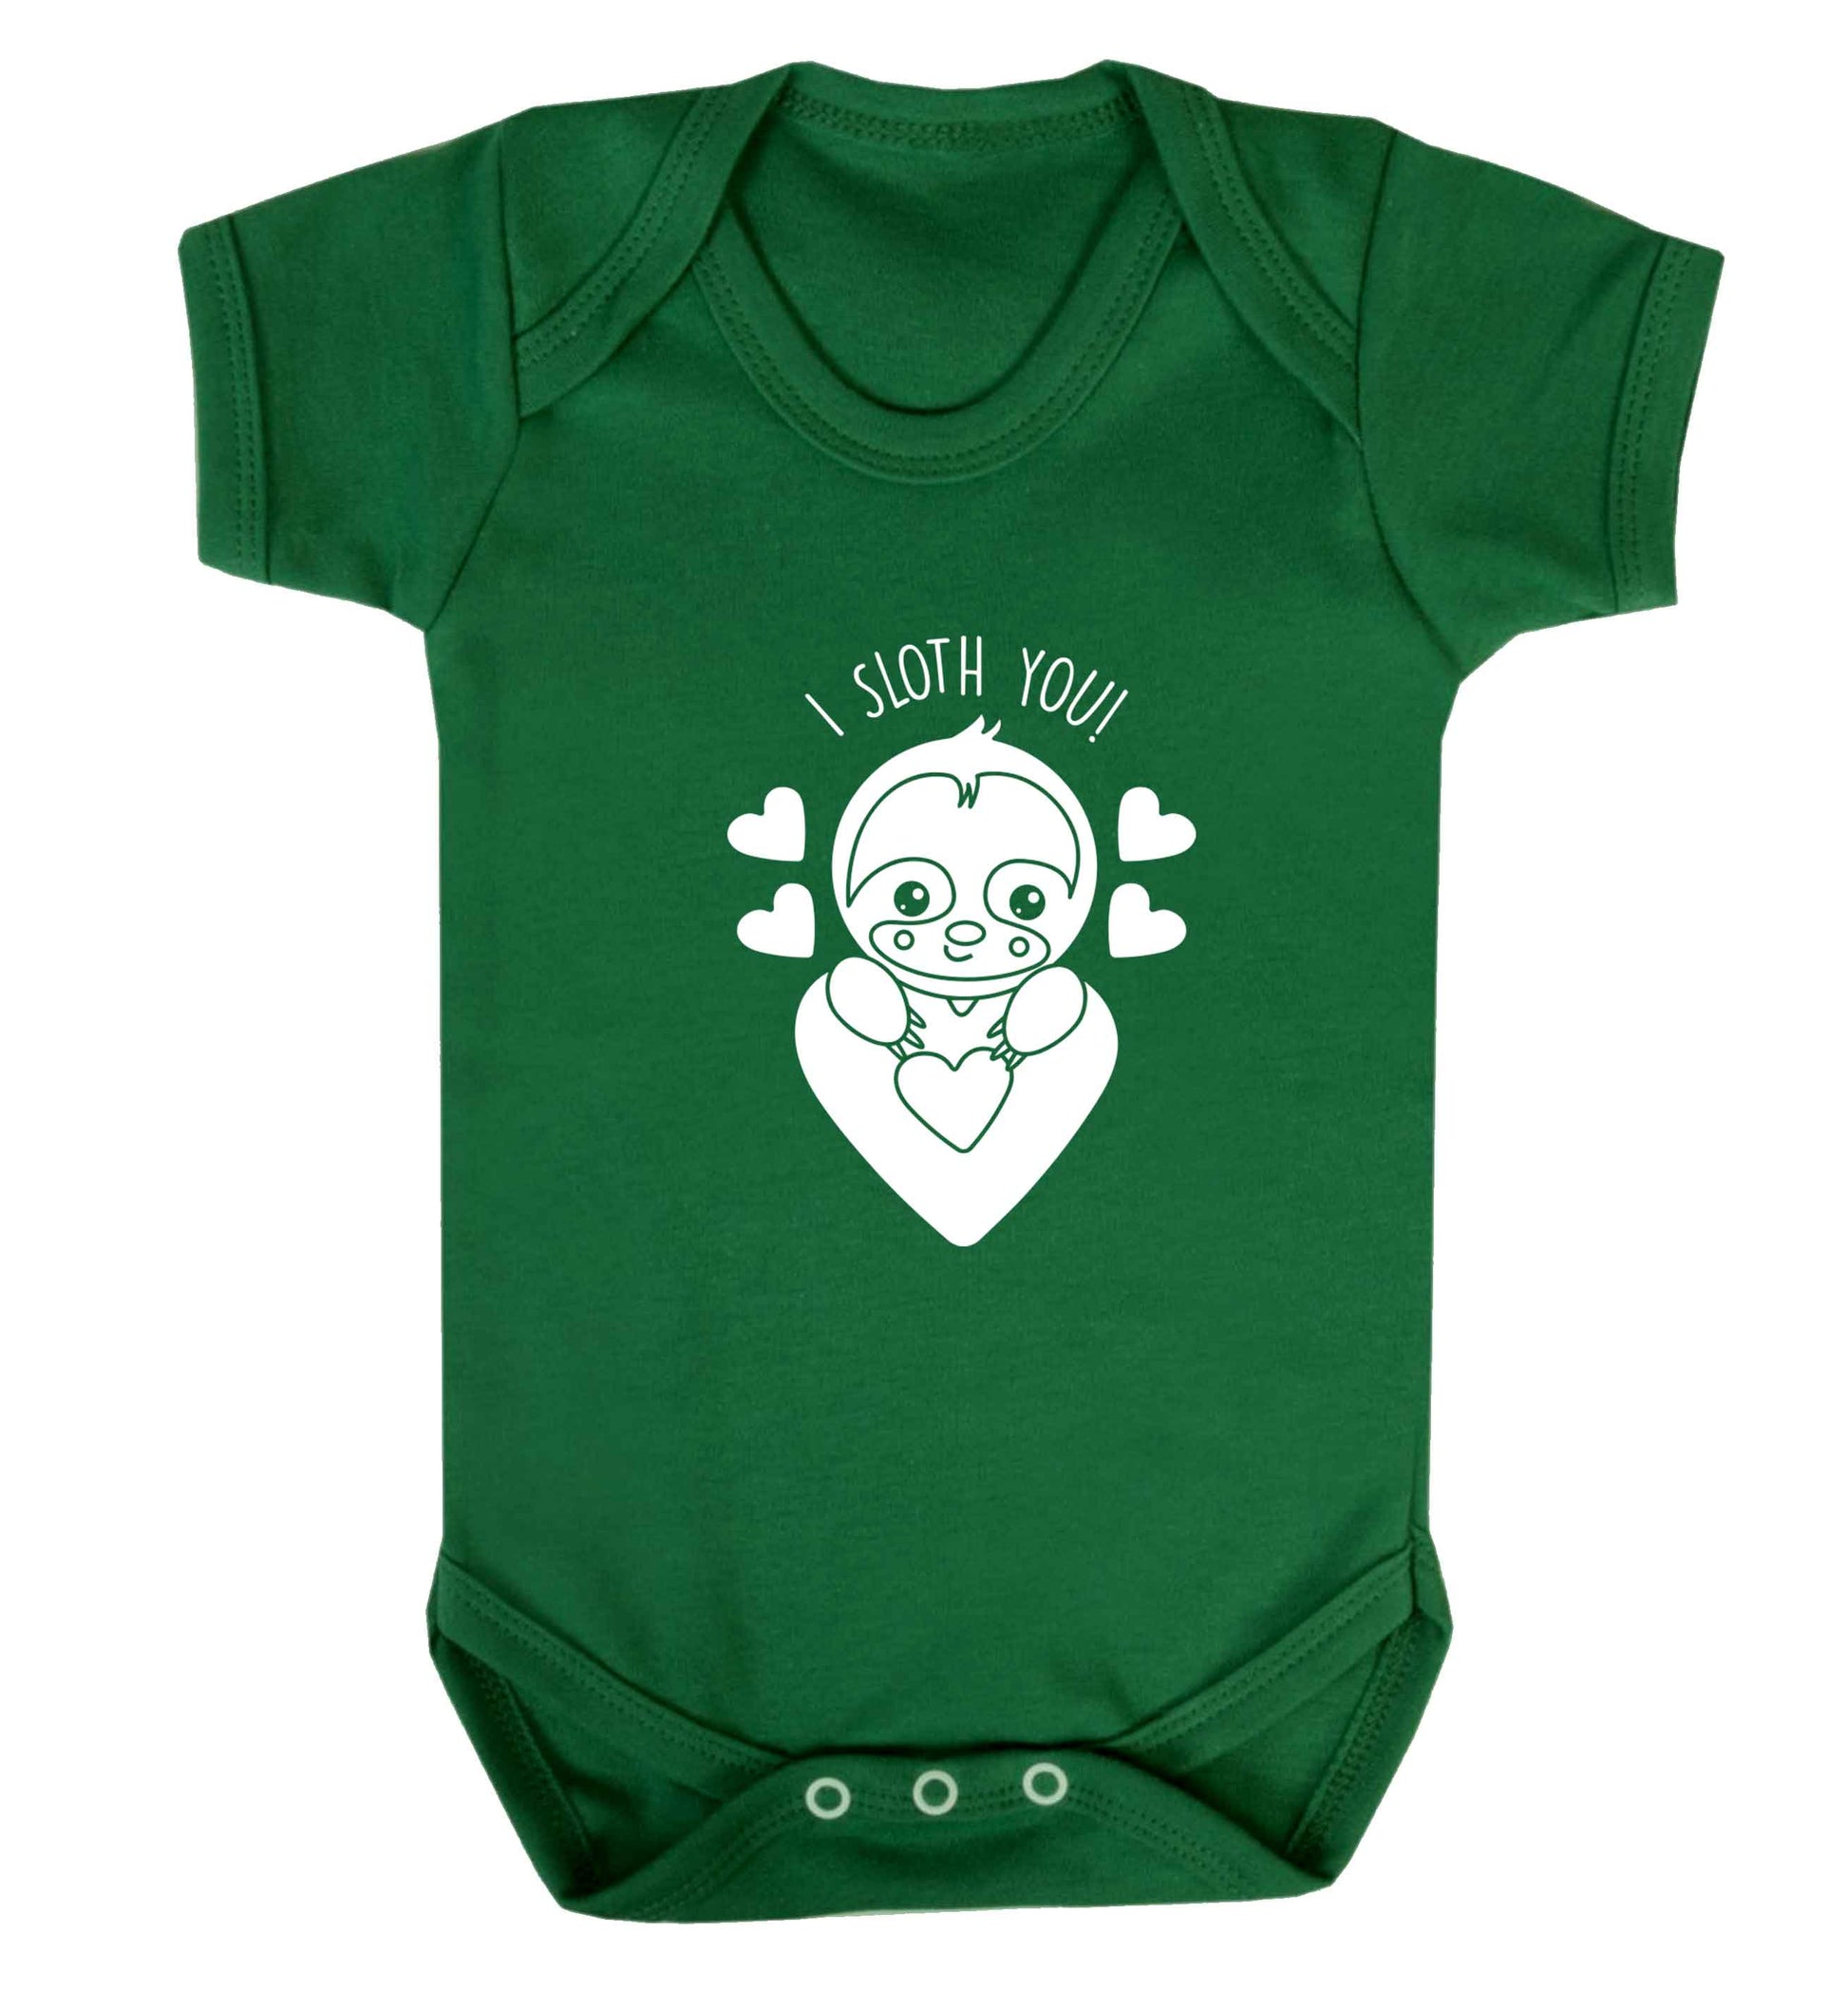 I sloth you baby vest green 18-24 months